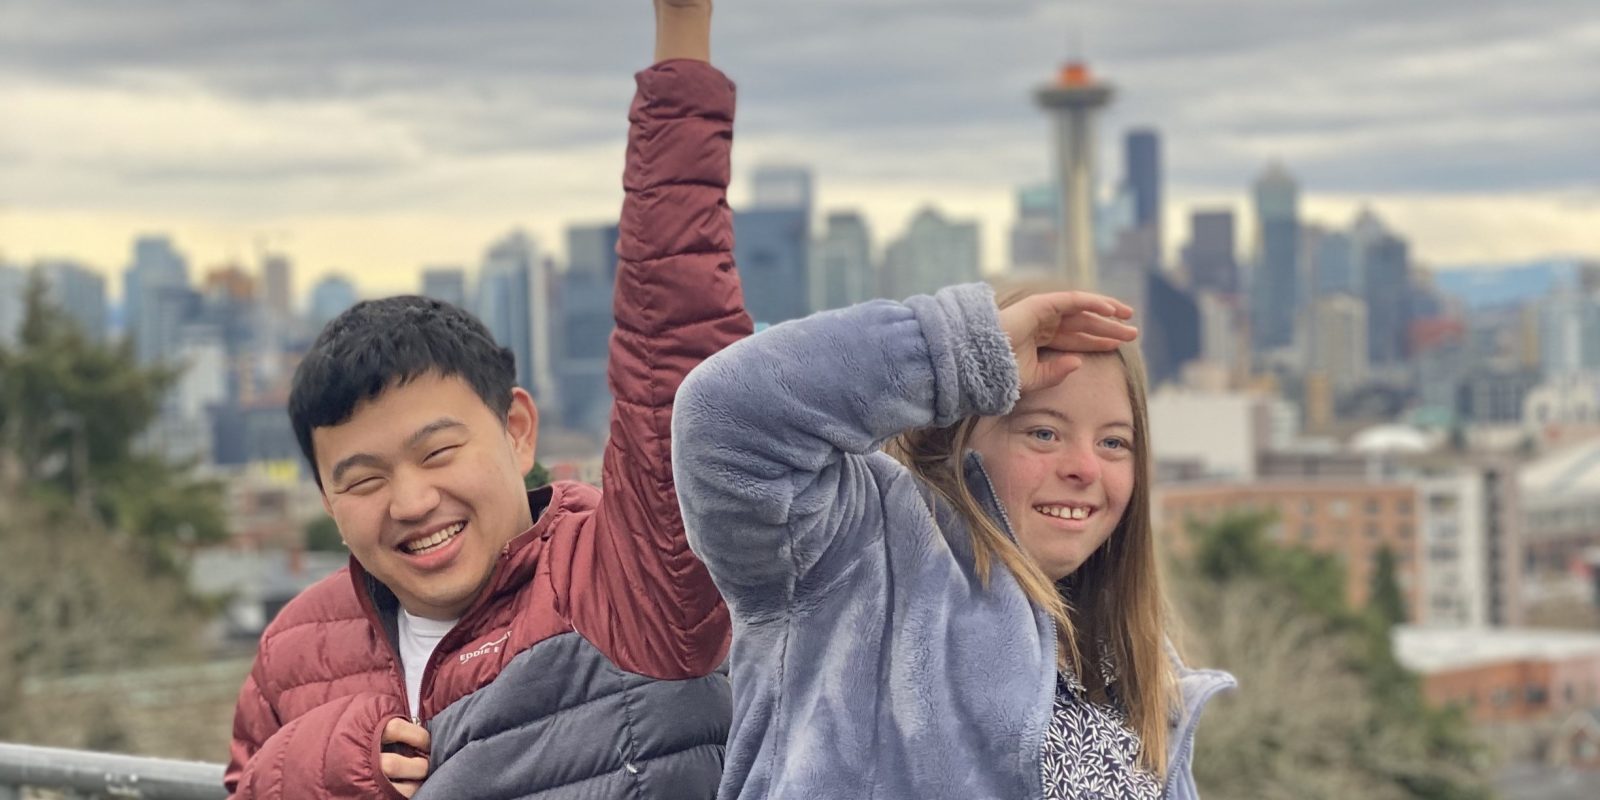 Two Tavon members posing in front of the Seattle skyline